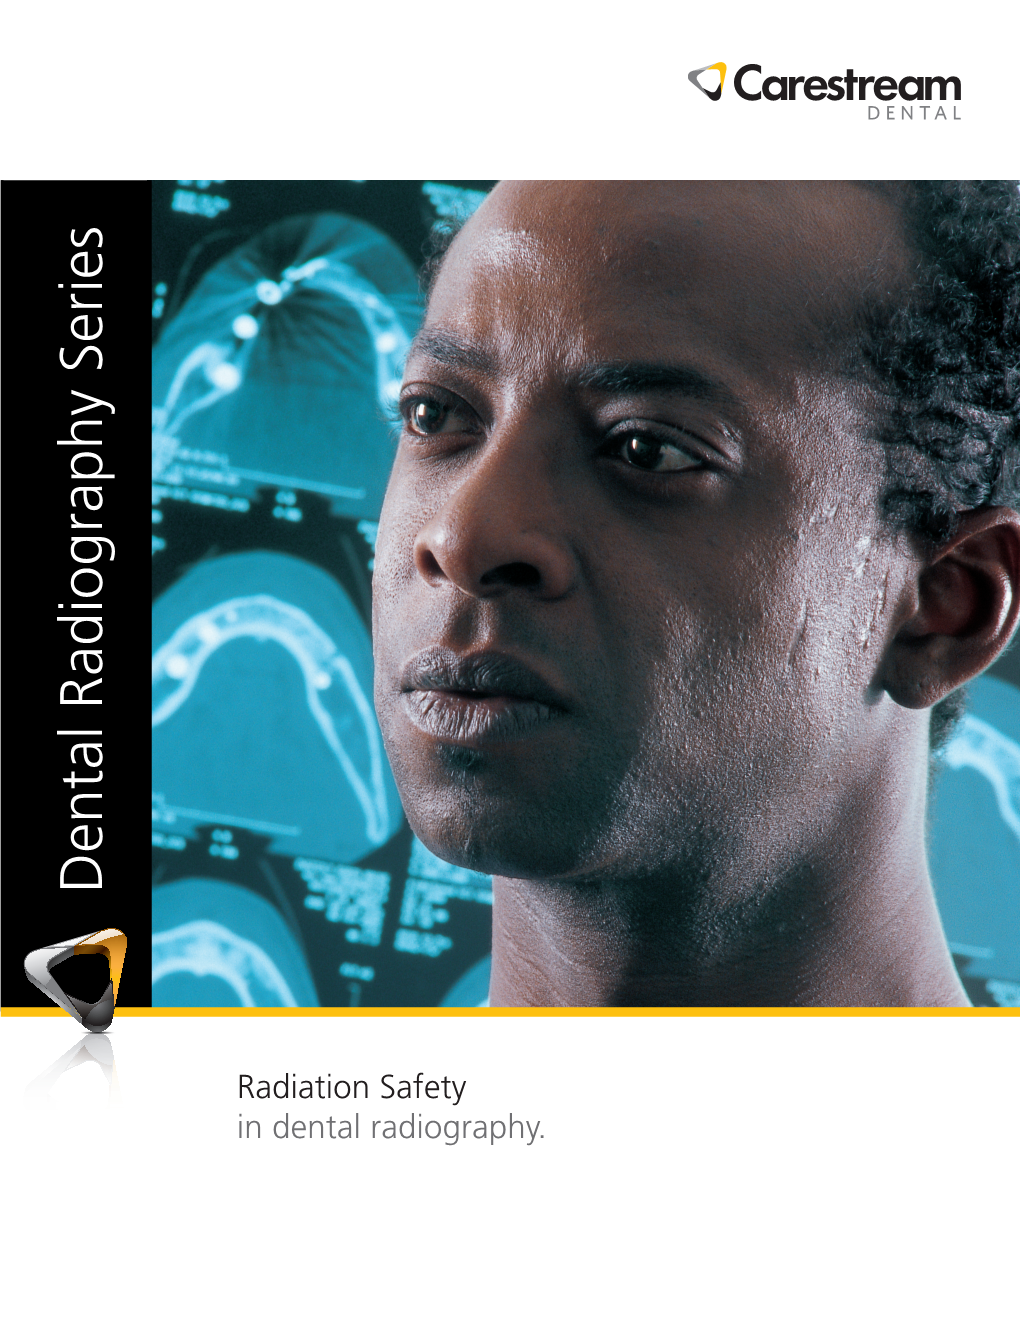 Radiation Safety in Dental Radiography